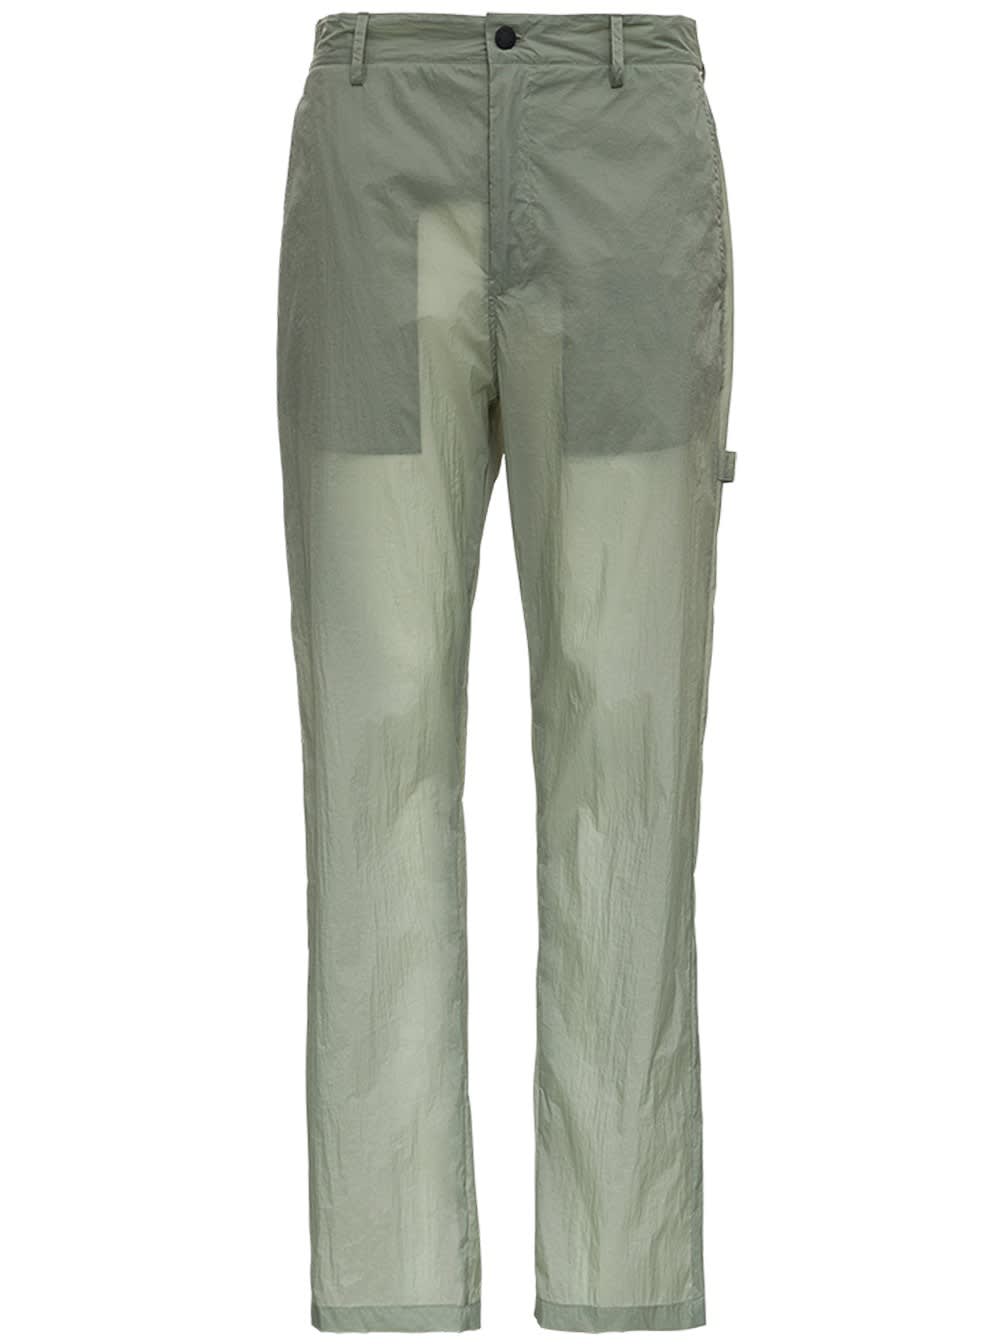 Moncler Genius Nylon Trousers By Craig Green